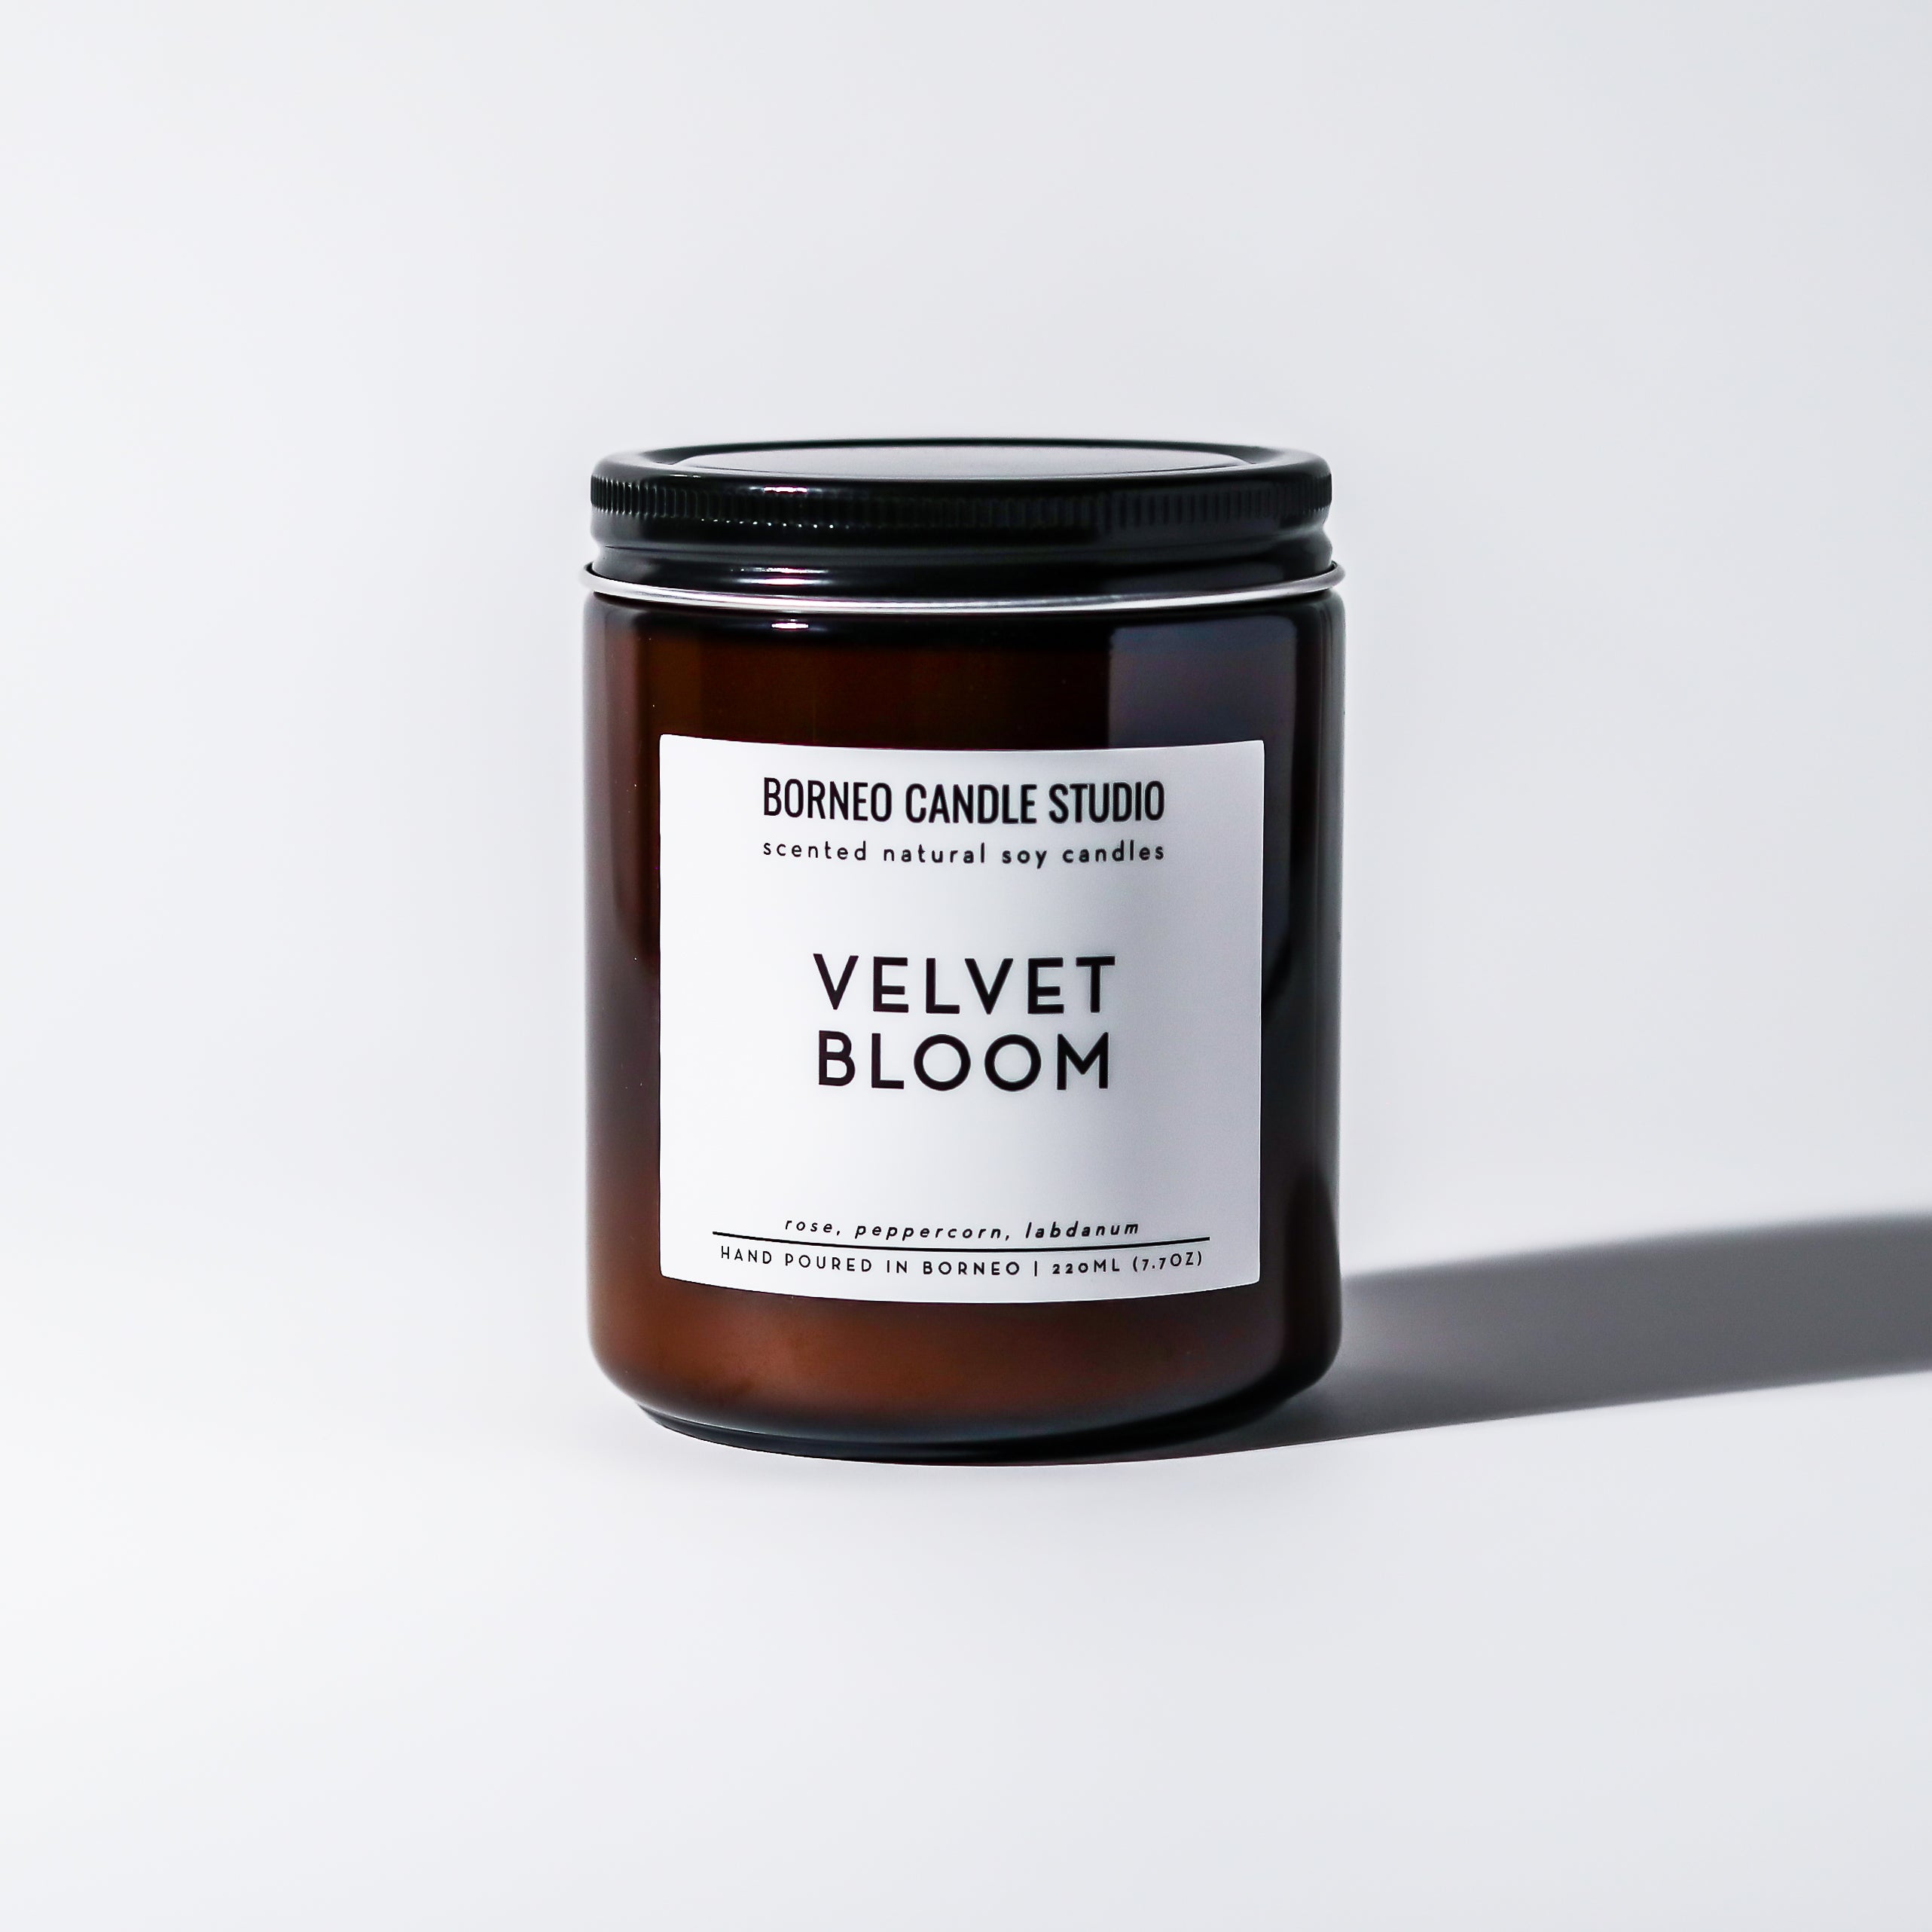 Velvet Bloom Scented Candle - fragrance notes of roses, peppercorn and labdanum